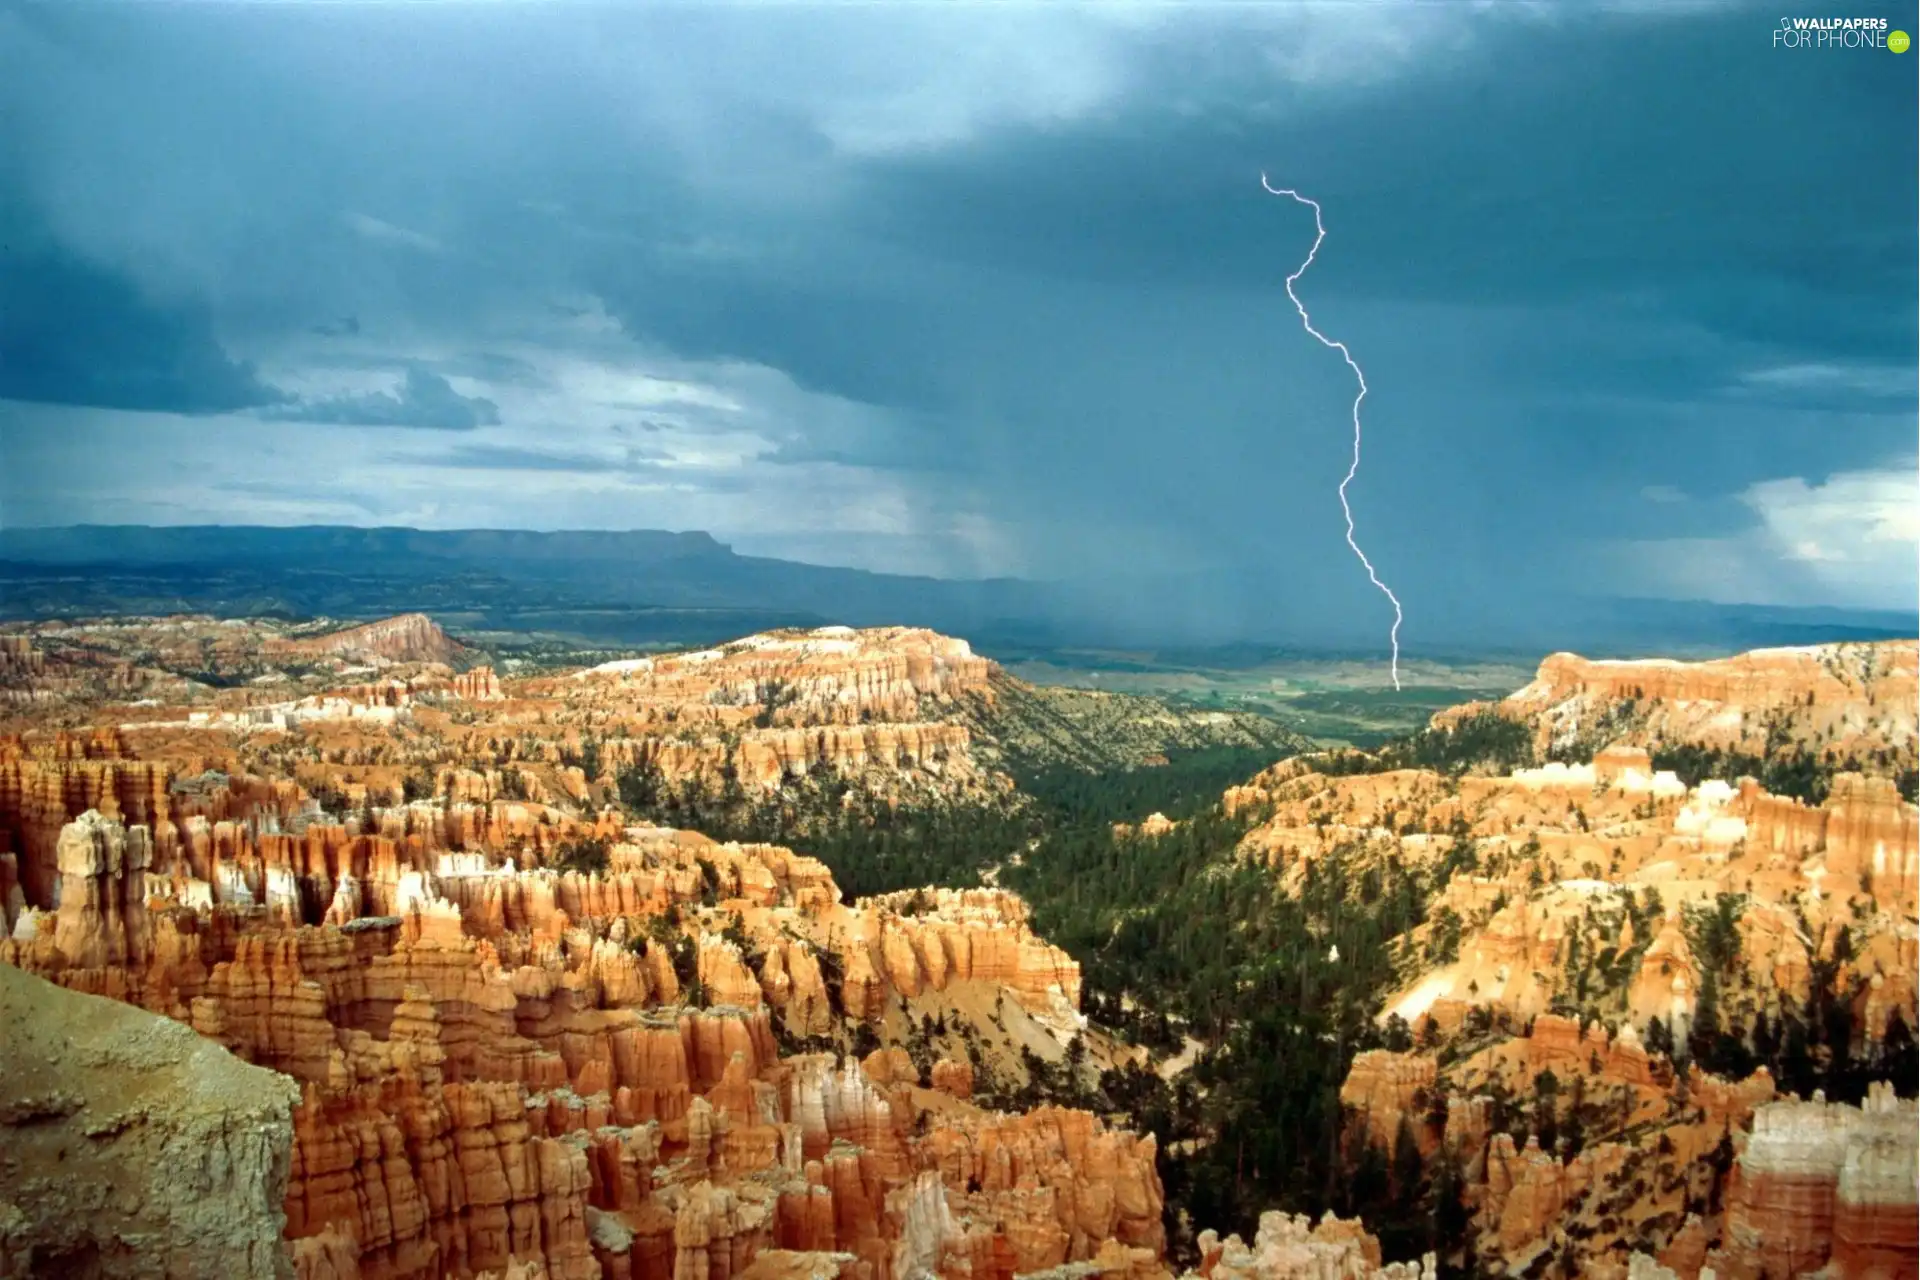 Landscapes, Mountains, canyons, Storms